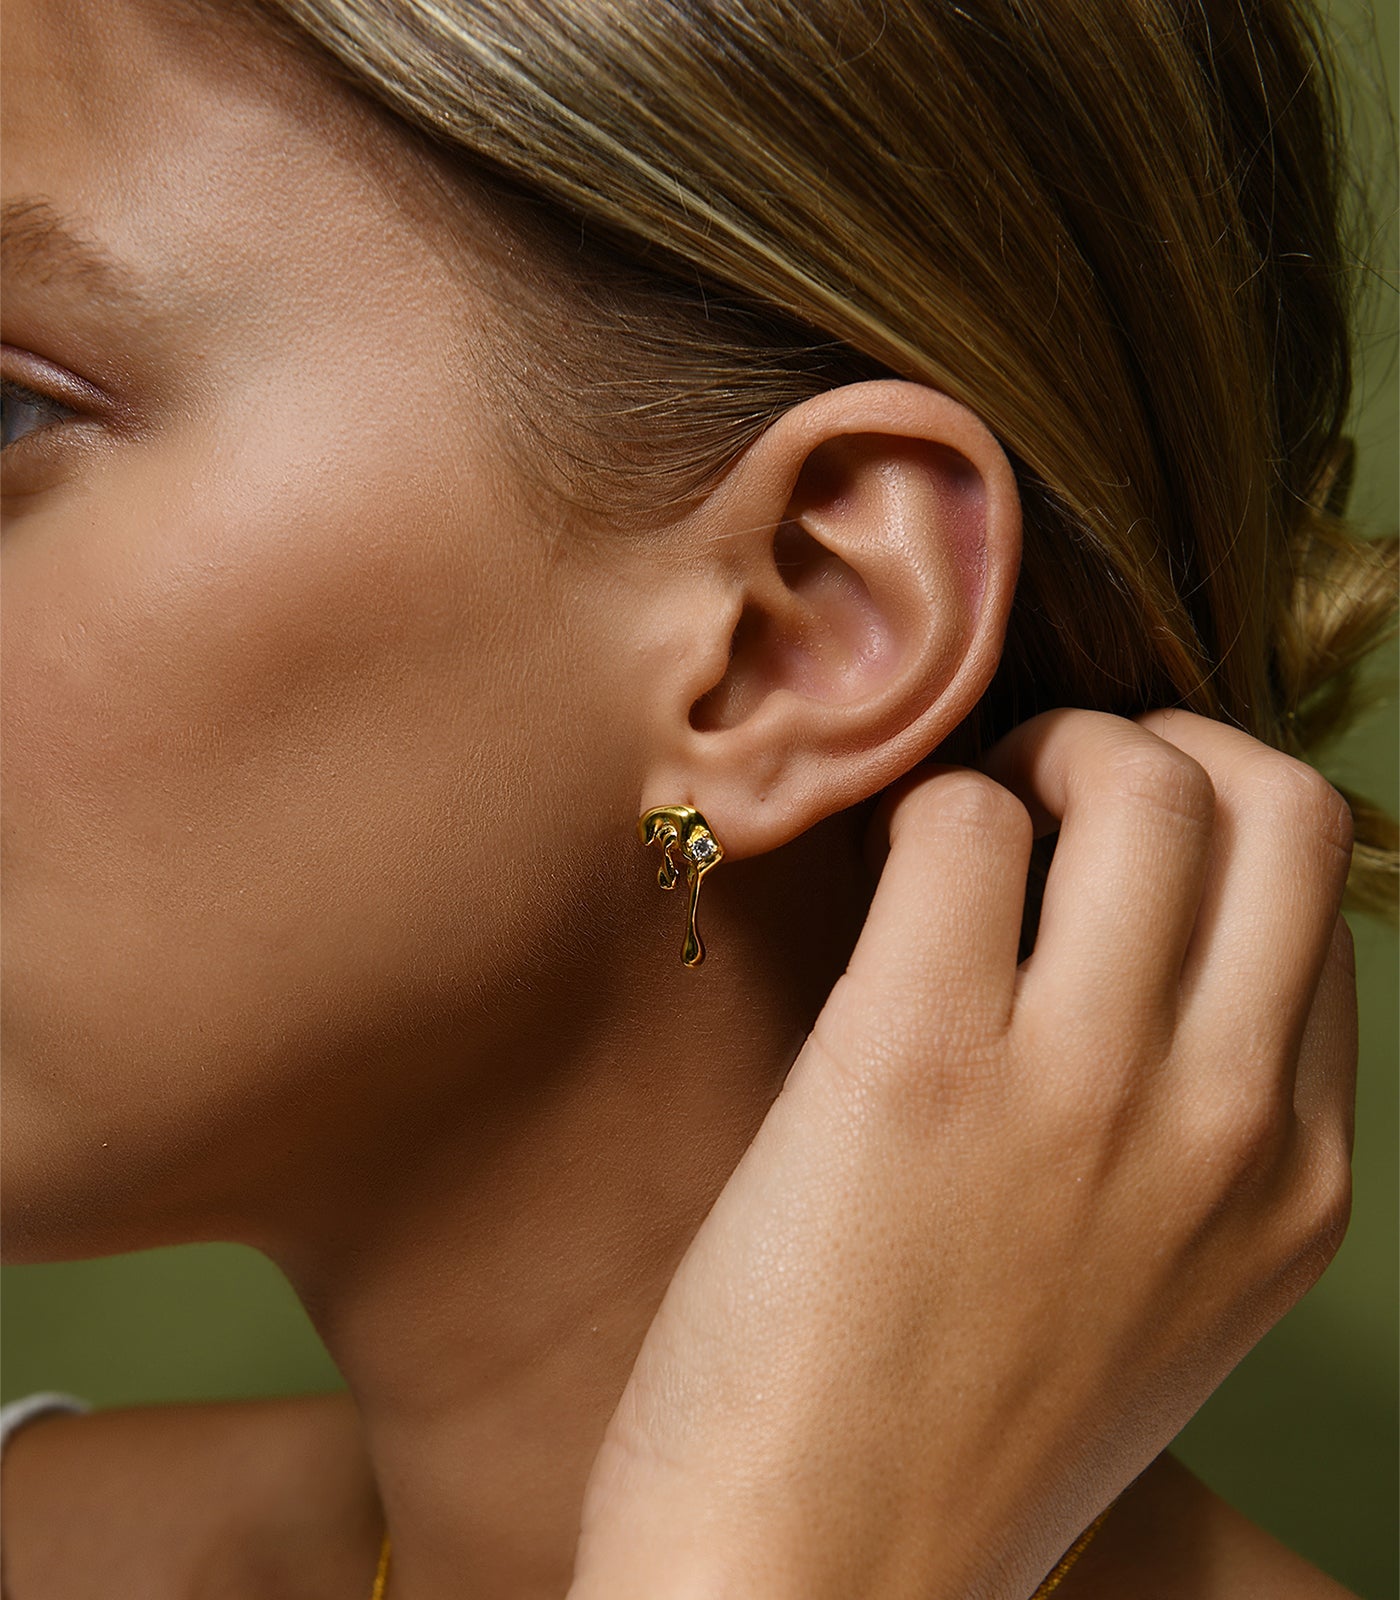 A pair of gold vermeil, water droplet earrings with a sparkling gem stone.